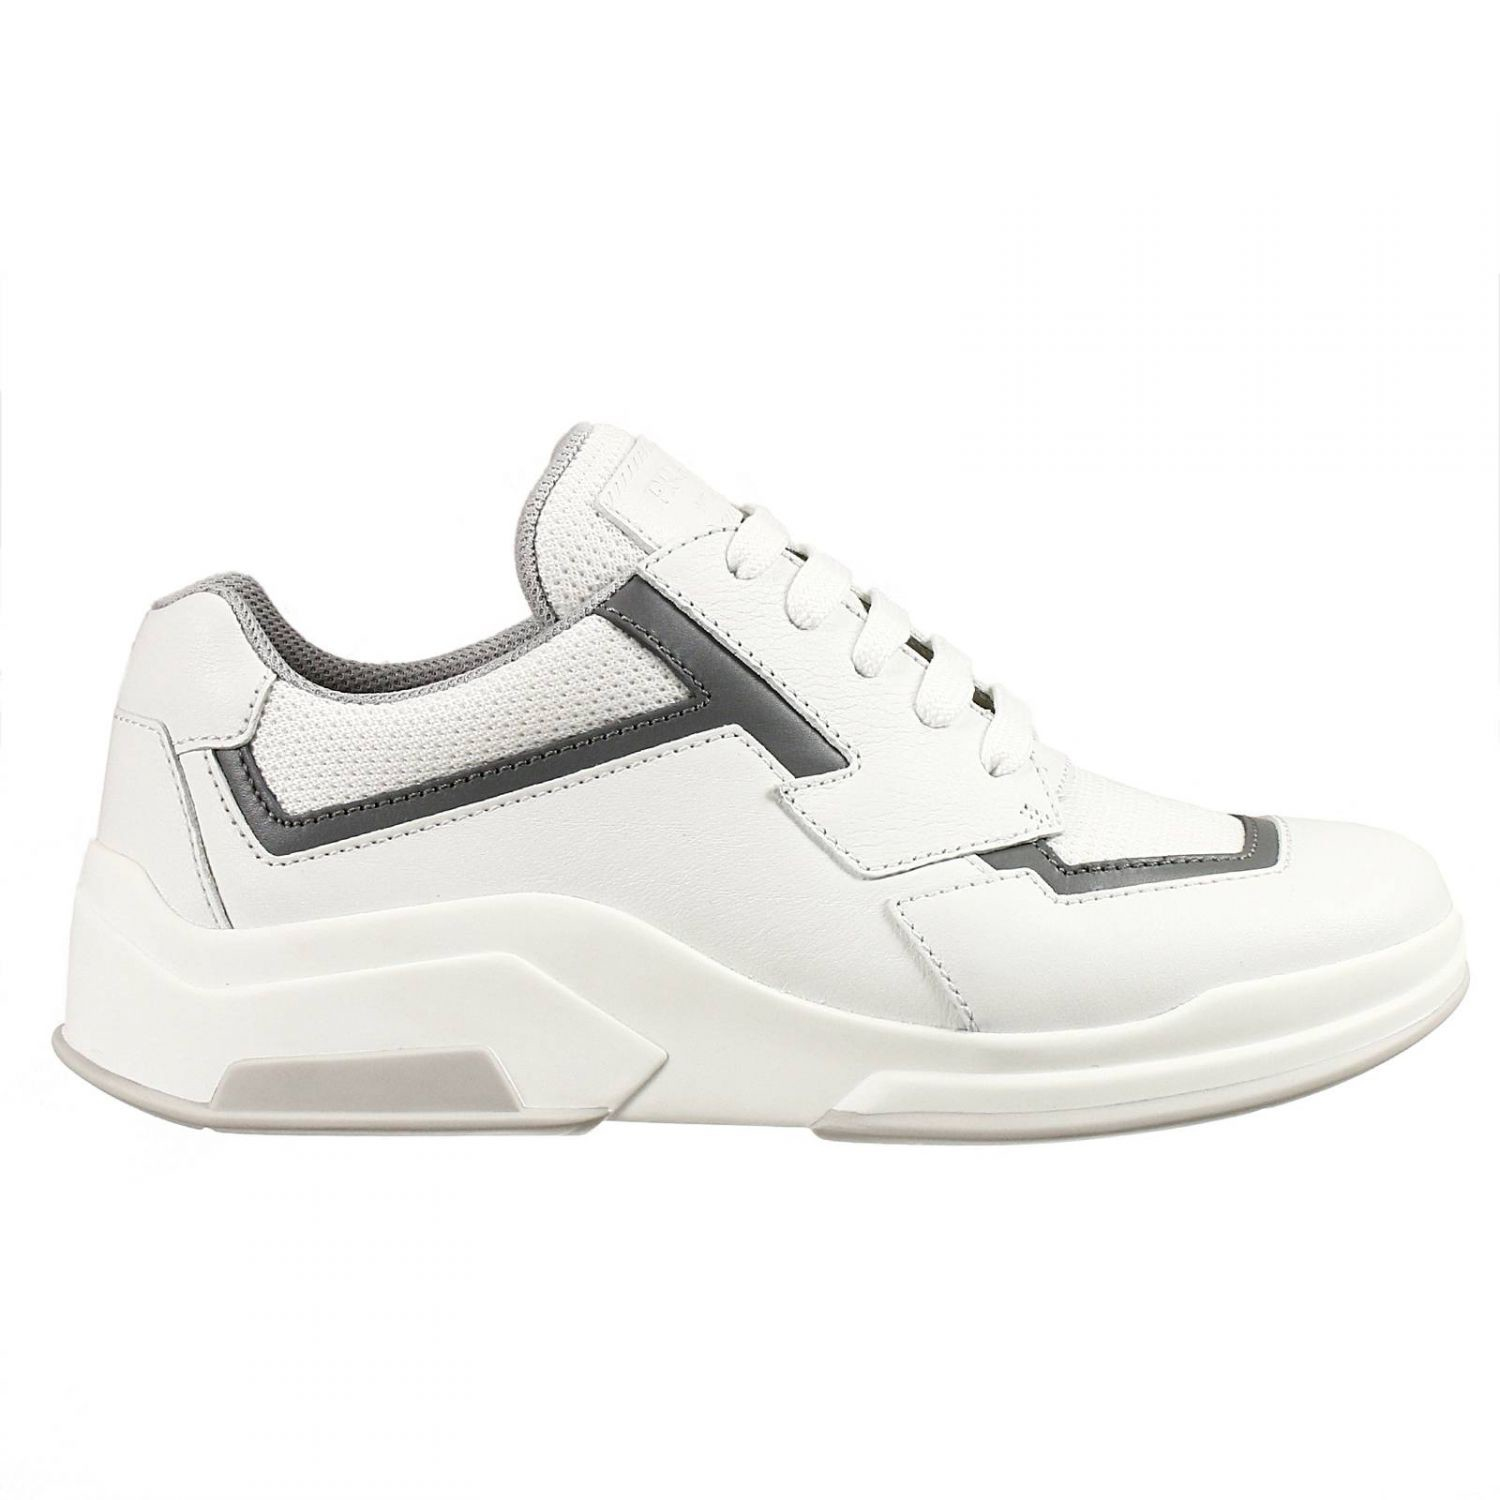 Prada | White Sneakers Shoes New Next Sneakers Leather E Bike | Lyst